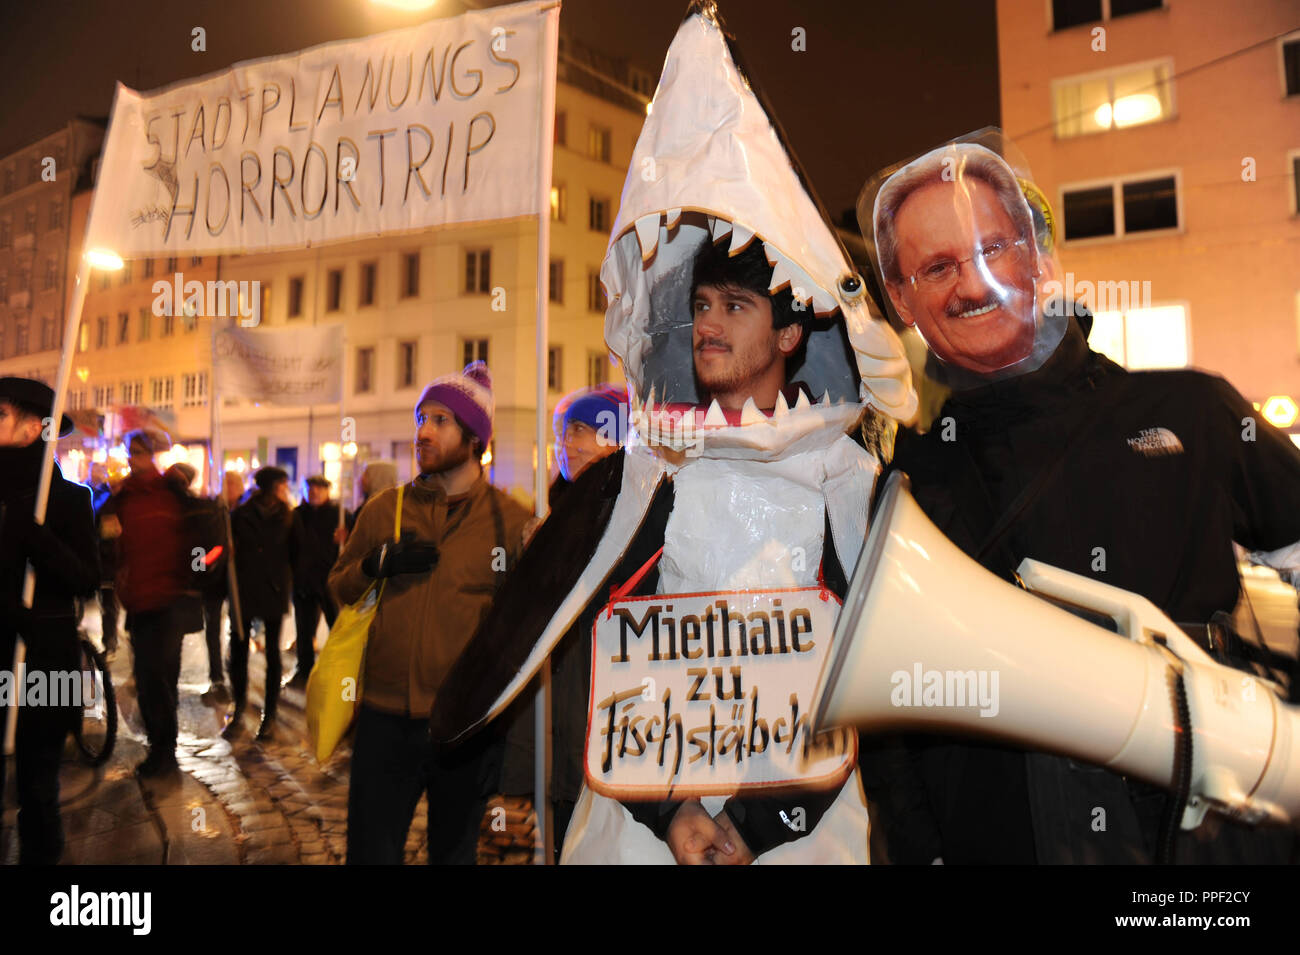 Demonstrators are protesting against the transformation of the city to a ghetto of the rich at a 'Stadtplanung-Horrortrip' event. Among other things, it is against luxury apartments like the Glockenbach suites. A banner bears the inscription Miethaie zu Fischstäbchen' (chop the landlord sharks into fish sticks), a demonstrator carries a portrait of Christian Ude. Stock Photo